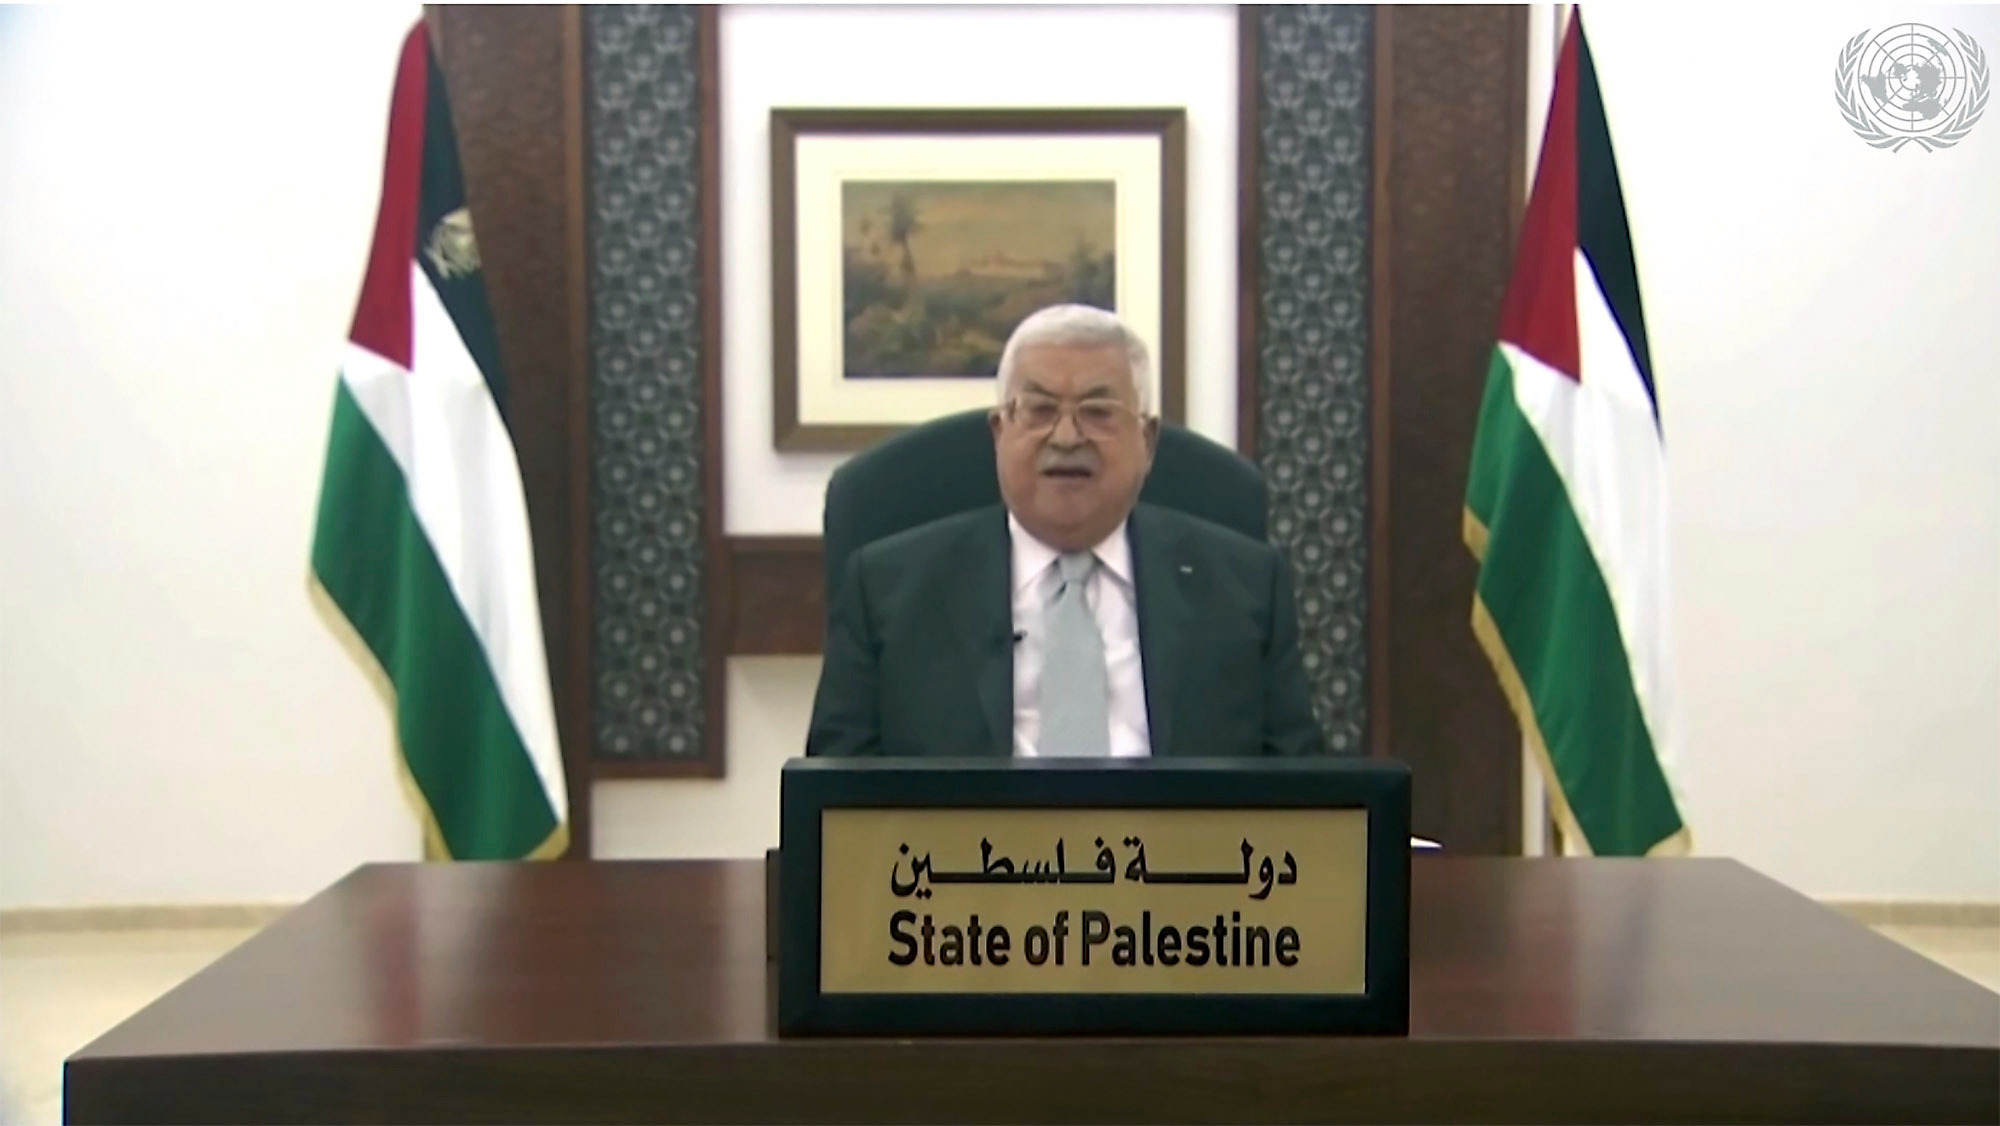 President Abbas Calls For Just Solution To Palestinian Issue, Criticises Israeli Occupation